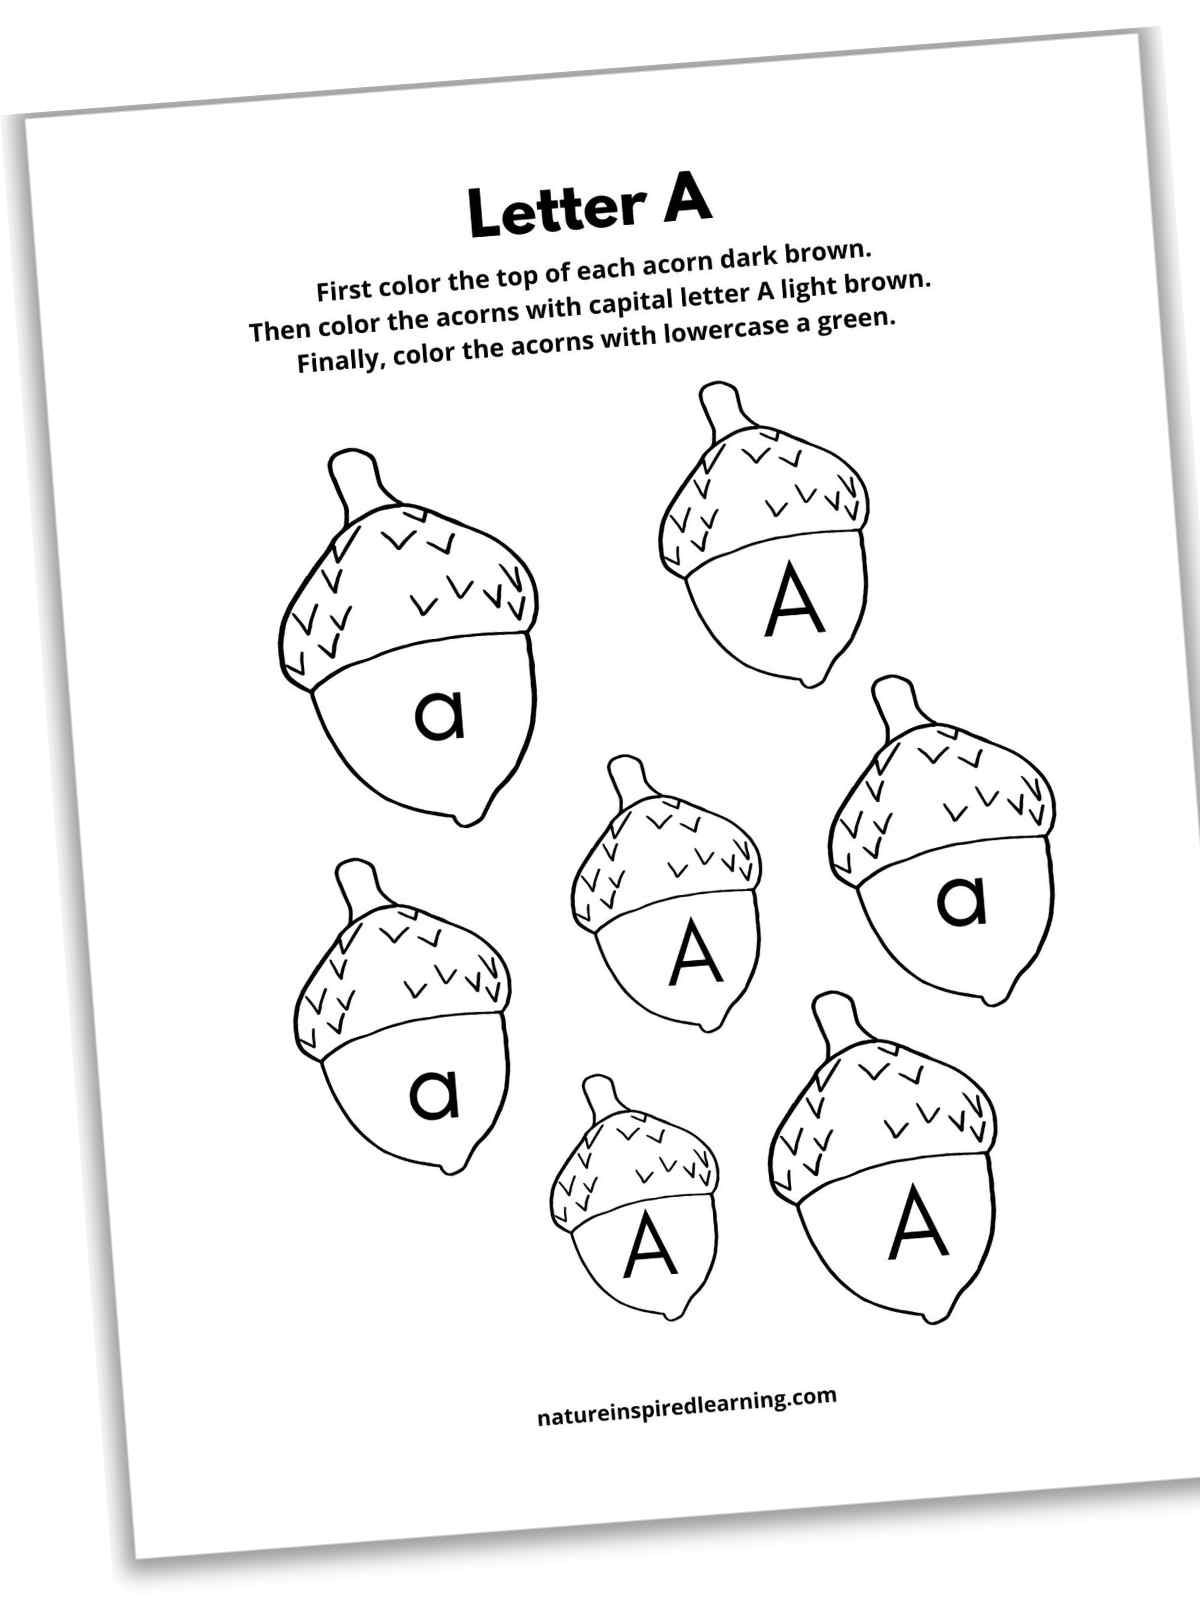 black and white worksheet with acorns with capital A's and lowecase a's on them